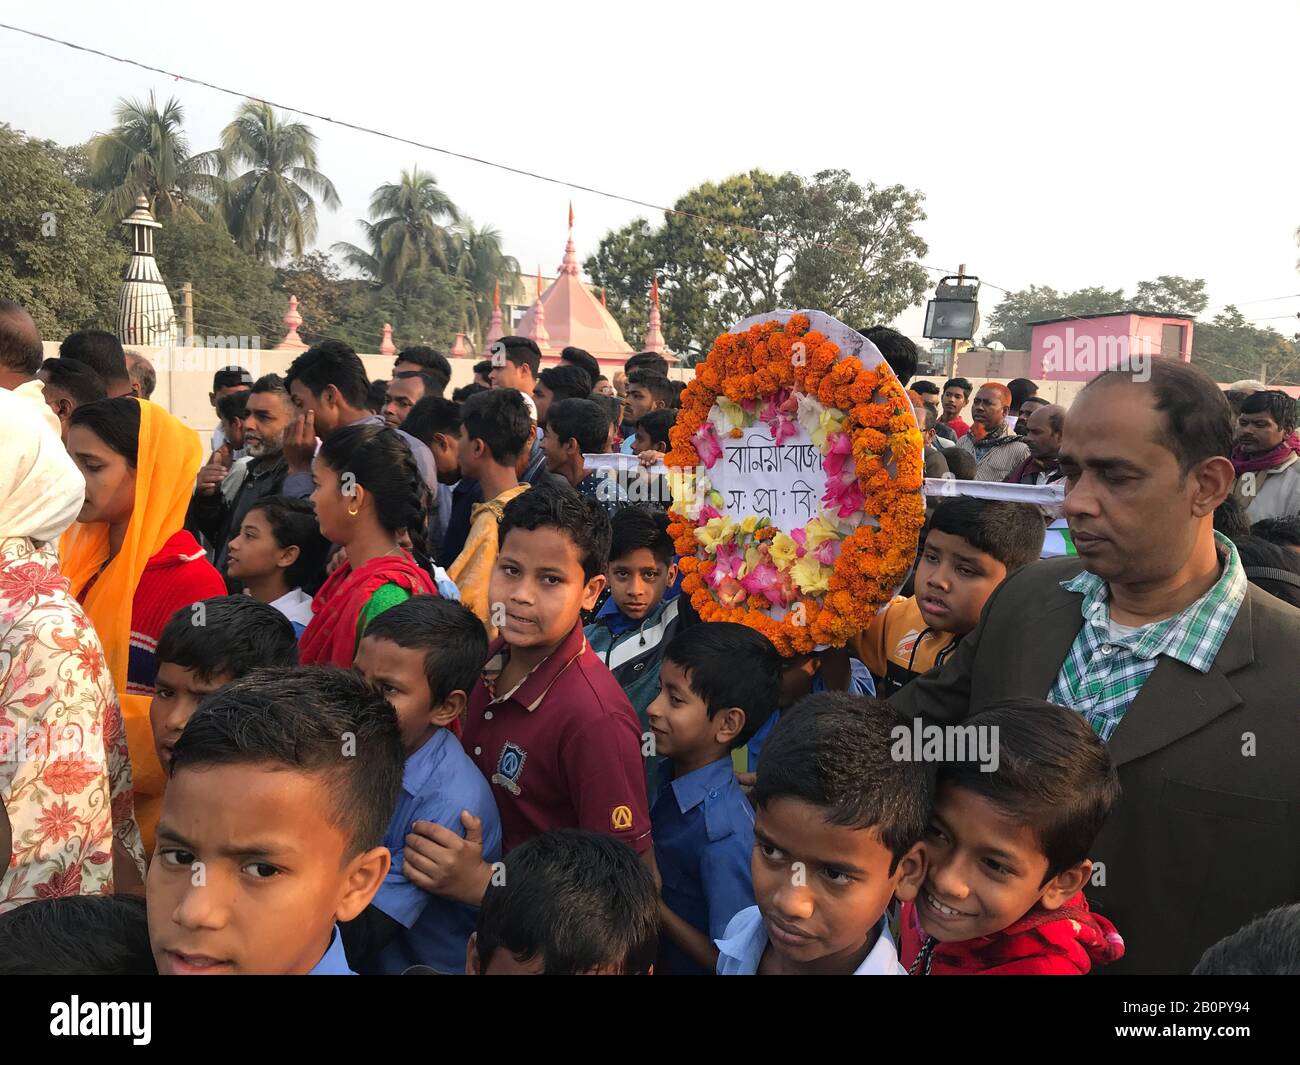 Jamalpur, Bangladesh. 21st Feb, 2020. Thousands of people gather at Jamalpur Language Martyrs' Memorial monument with flowers in homage to the martyrs of the 1952 Bengali Language Movement in Dhaka on February 21, 2020, on International Mother Language Day. (Photo by Ryan Rahman/Pacific Press) Credit: Pacific Press Agency/Alamy Live News Stock Photo